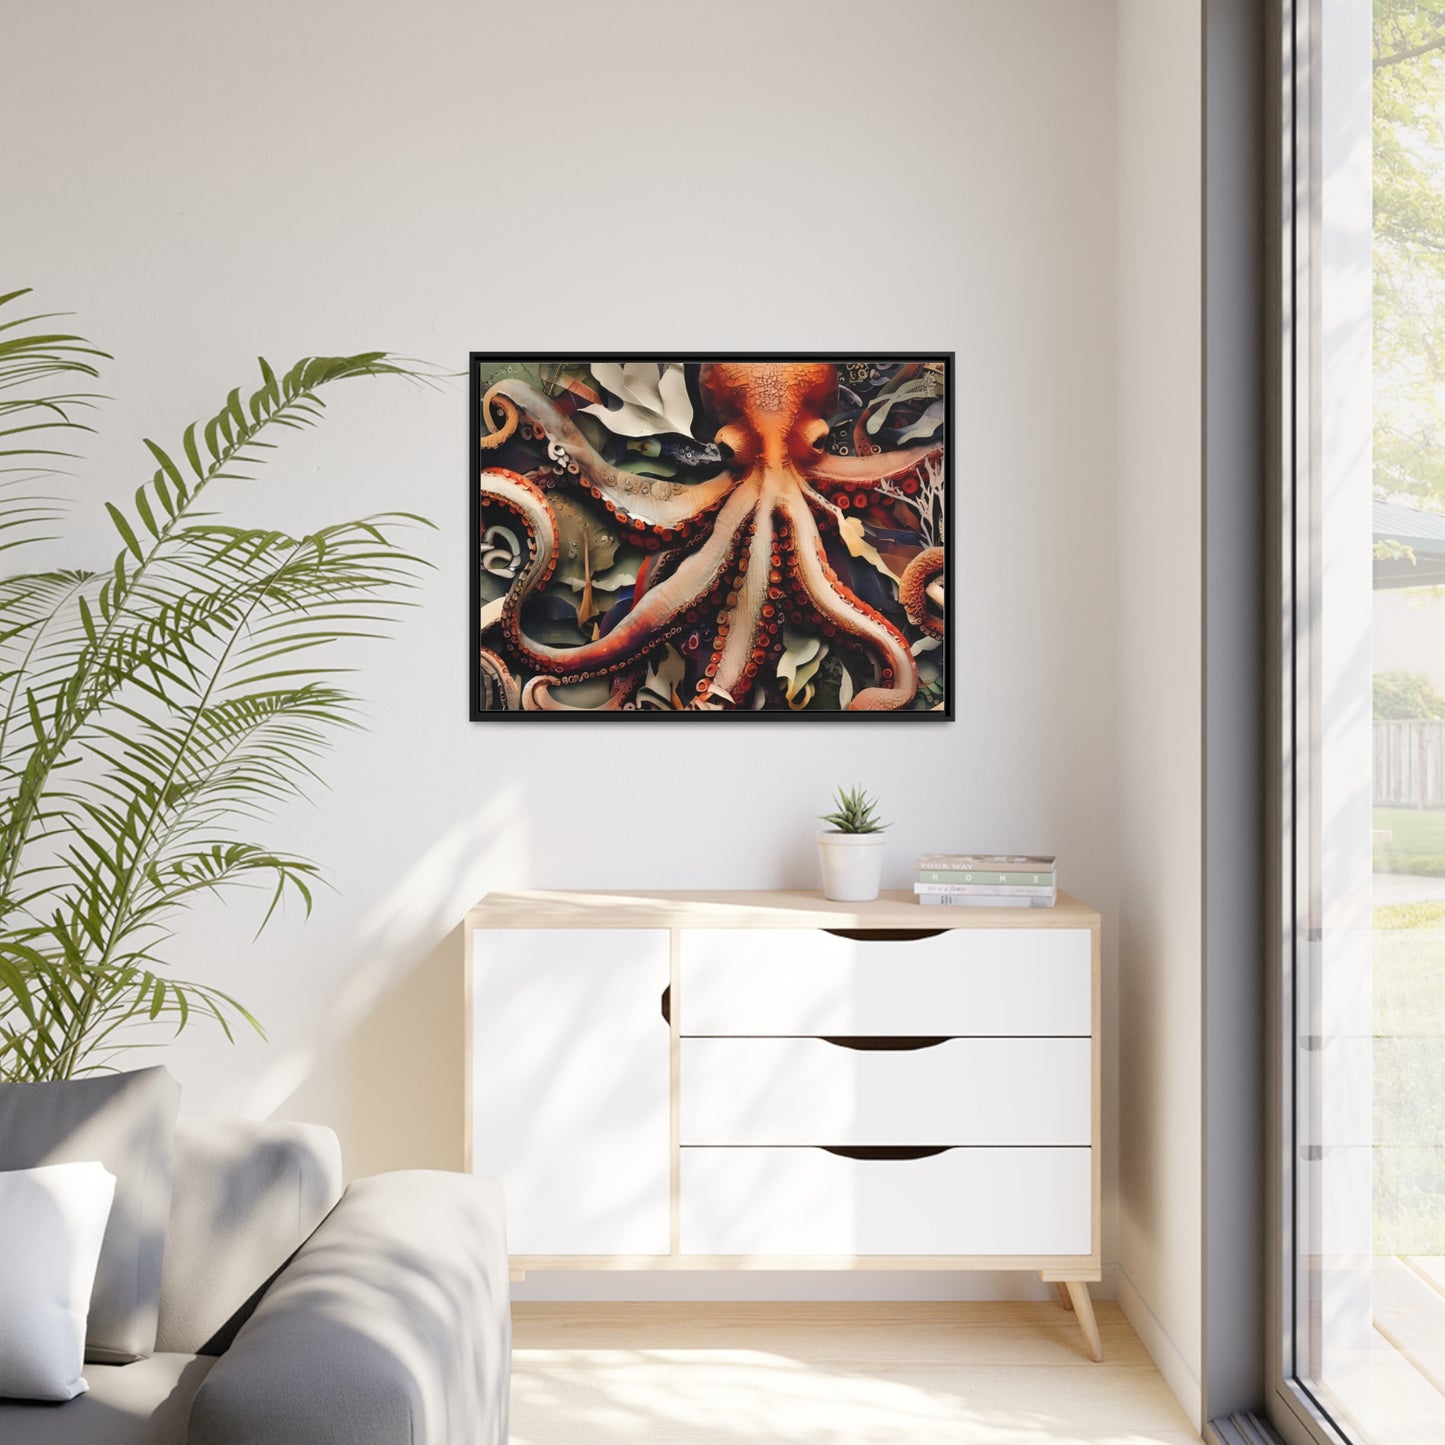 Home Decor - Matte Canvas Wall Art, Black Frame - Octopus - Gift Item Special